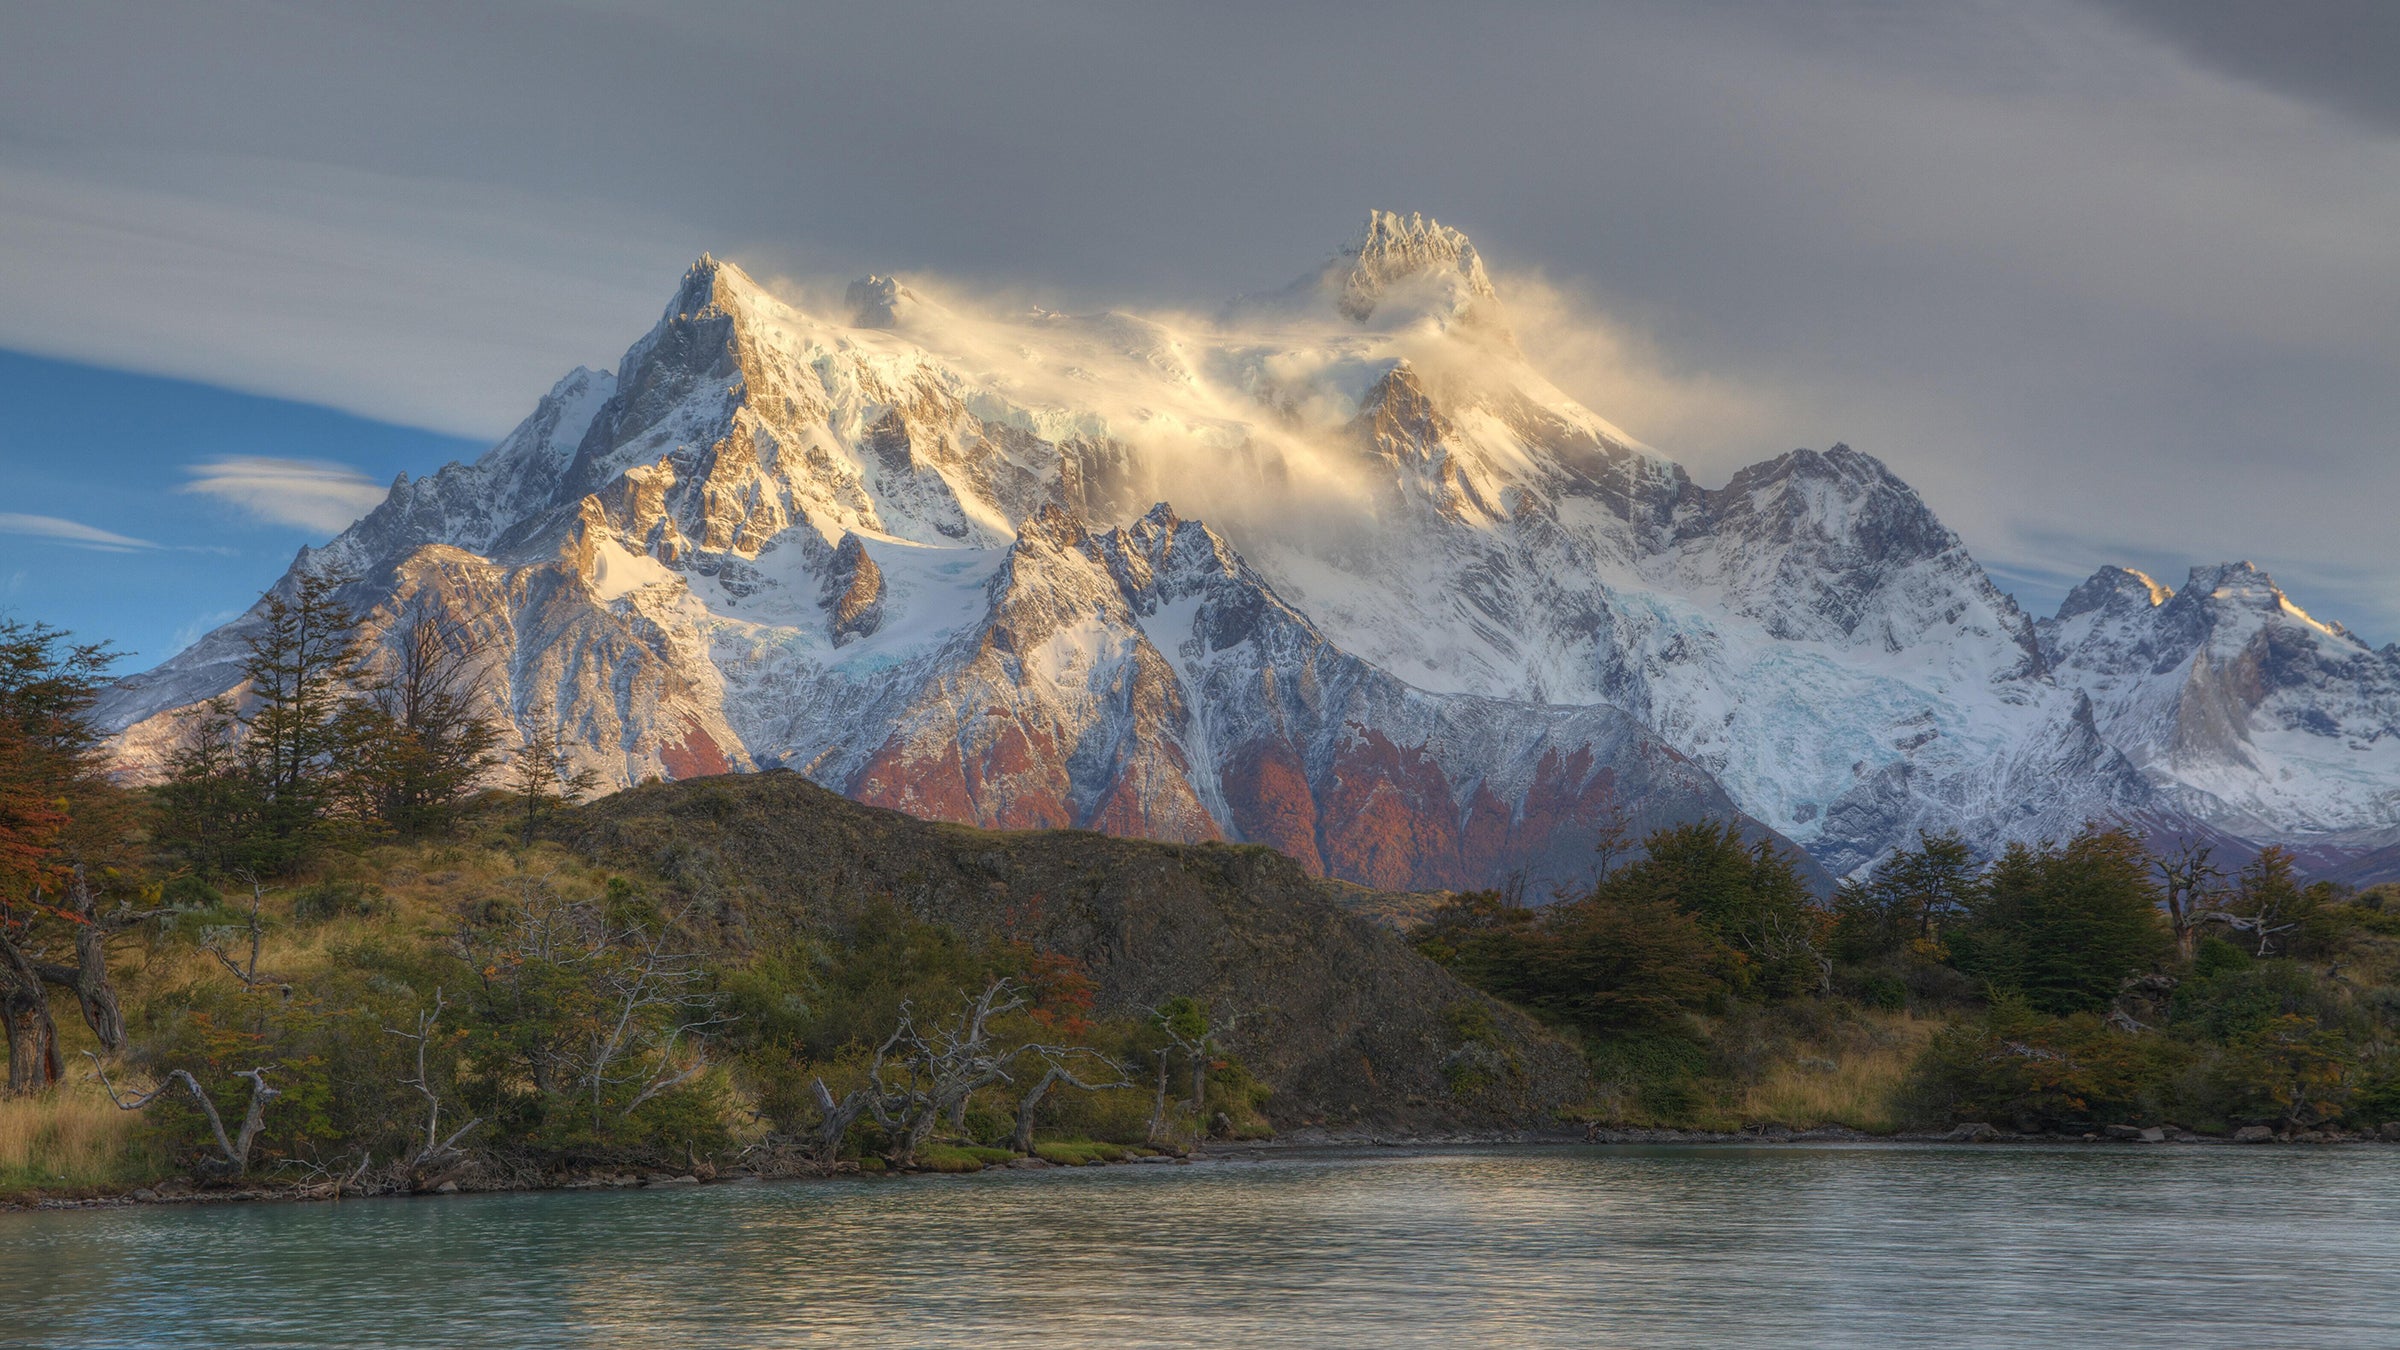 Chilean Patagonia’s majestic mountains